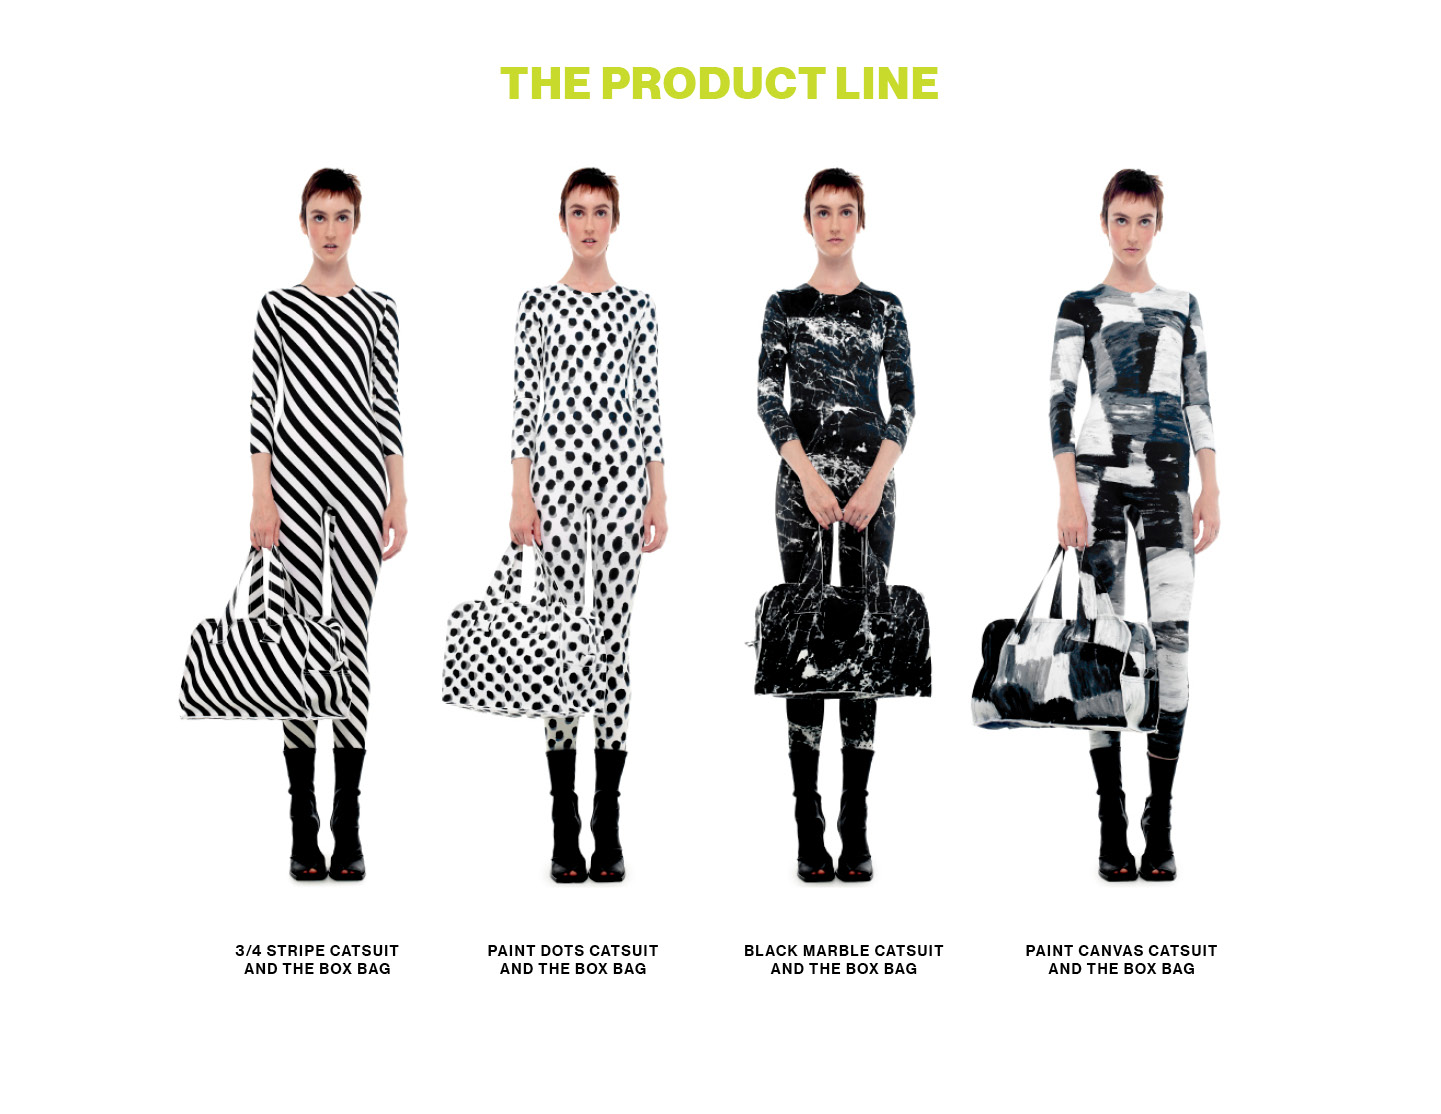 Catsuit product line